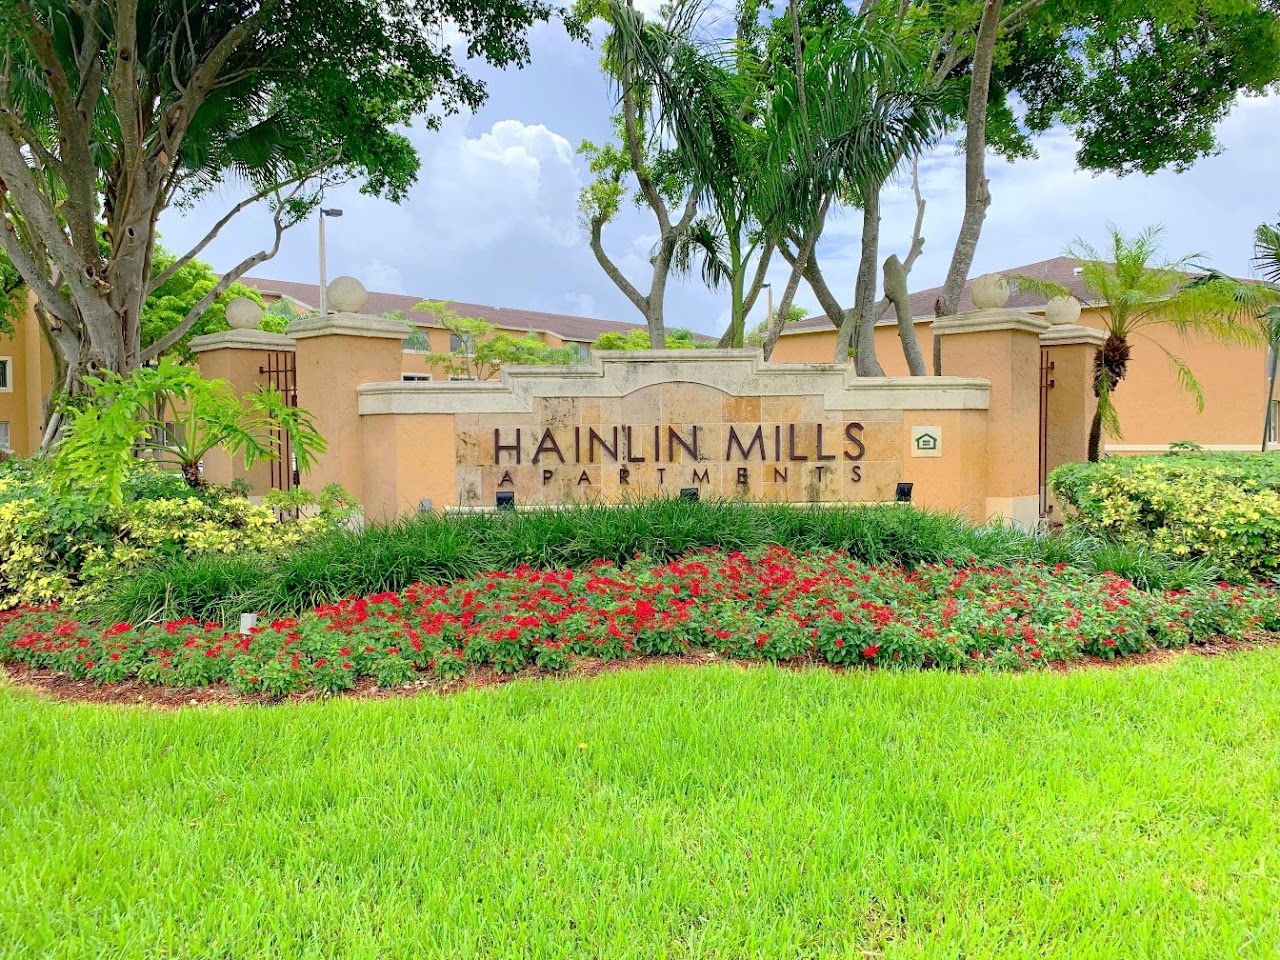 Photo of HAINLIN MILLS. Affordable housing located at 10400 SW 216TH ST CUTLER BAY, FL 33190